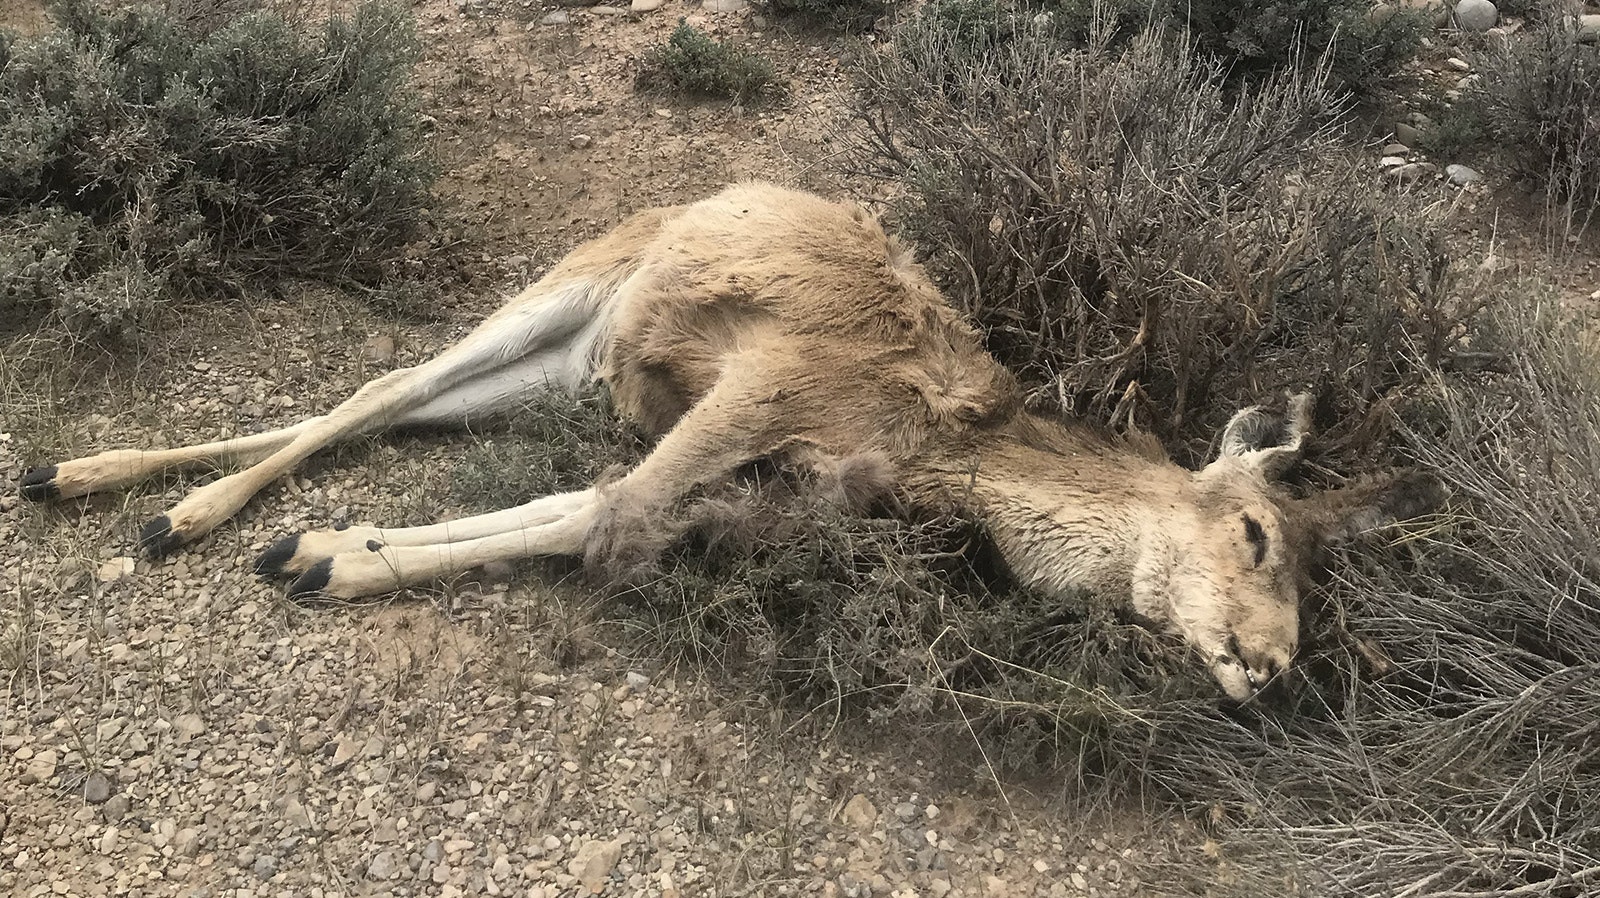 Countless mule deer died along oil field roads in the Sublette County this winter. The deer came to the roads to escape deep, crusted snow, only to starve to death.